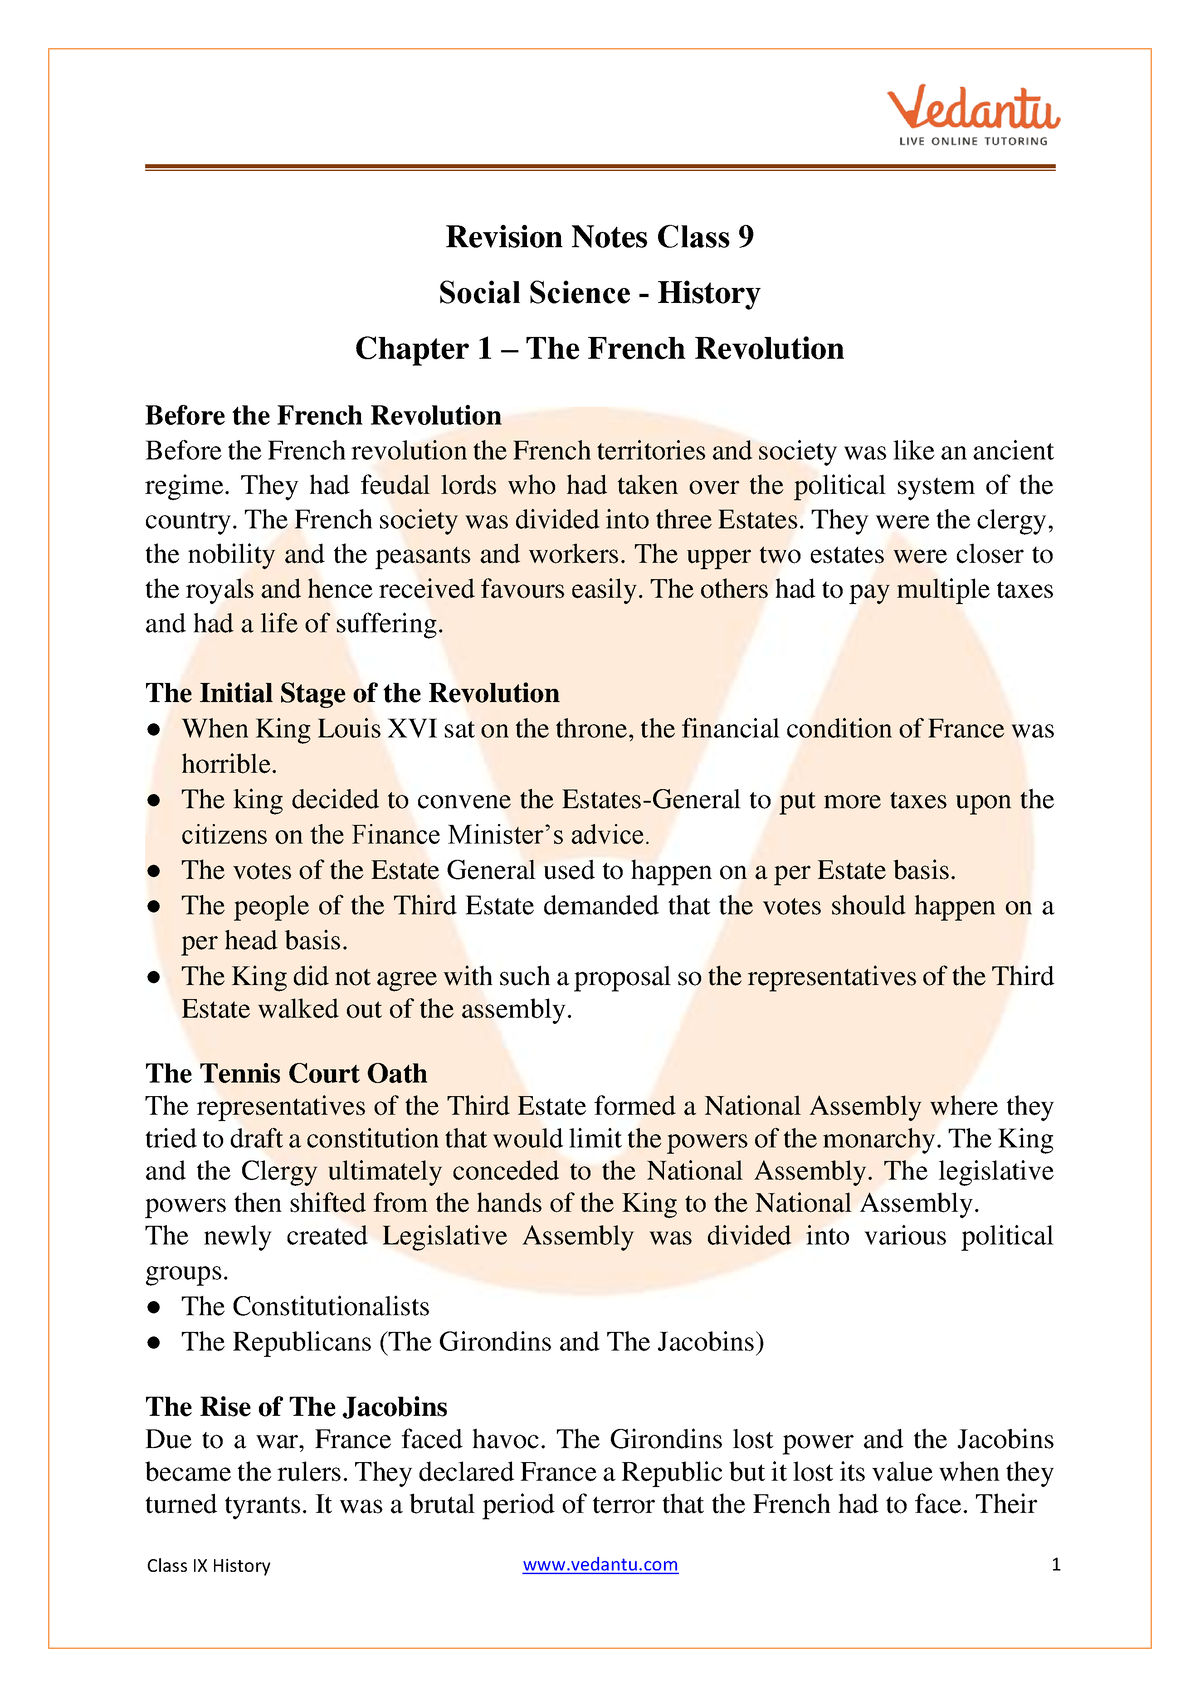 CBSE Class 9 History Chapter 1 Notes - The French Revolution - Class IX ...